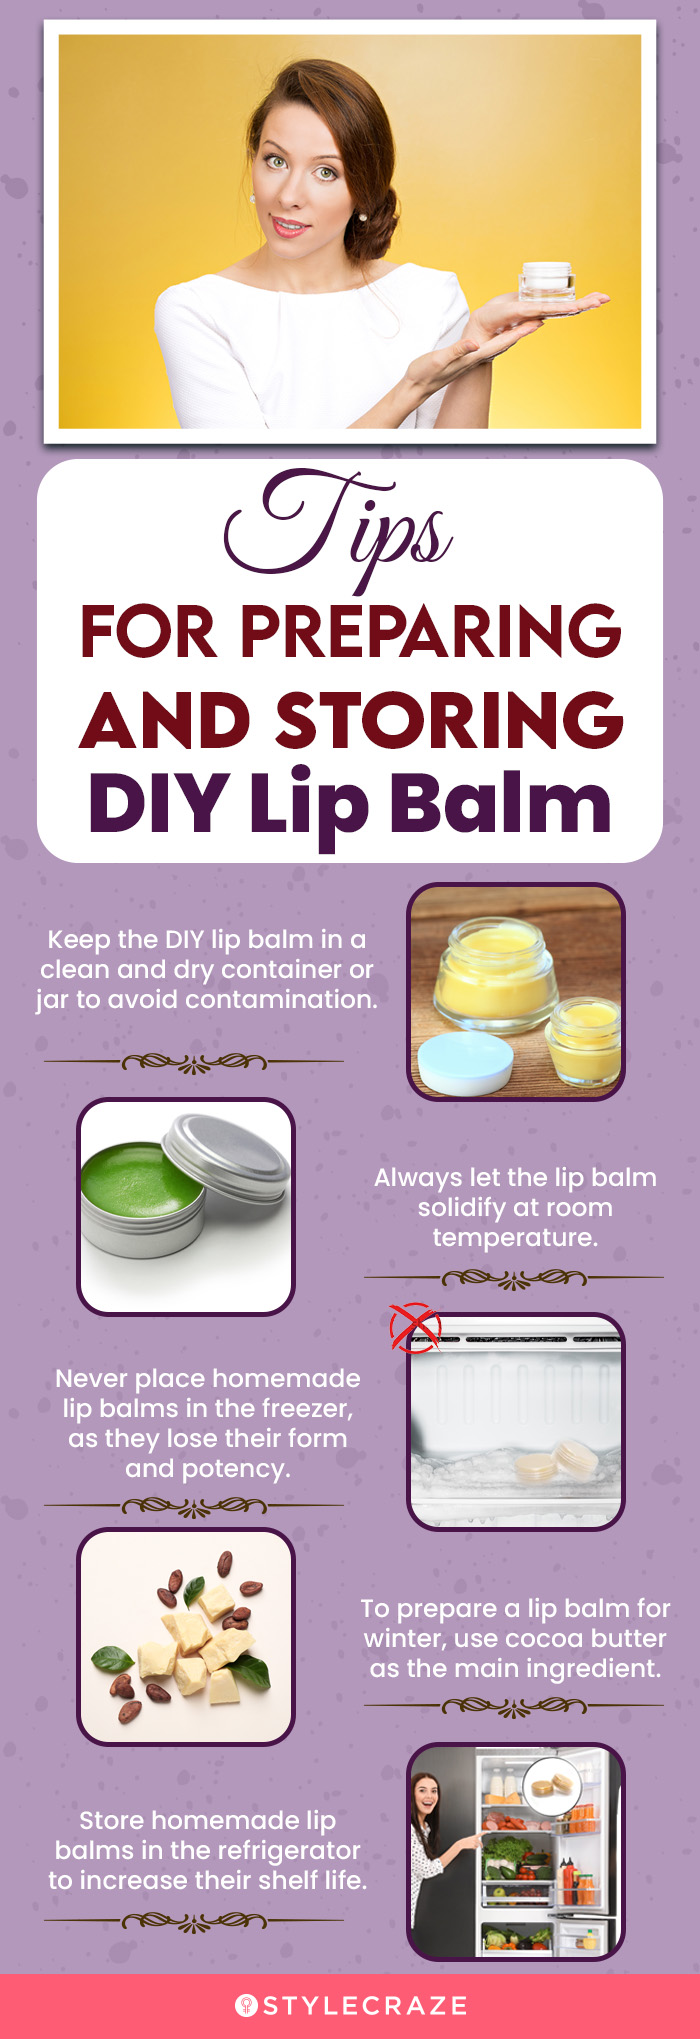 Organic Lip Balm Recipe (to Make and Sell Online) - DIY Skin Care Business